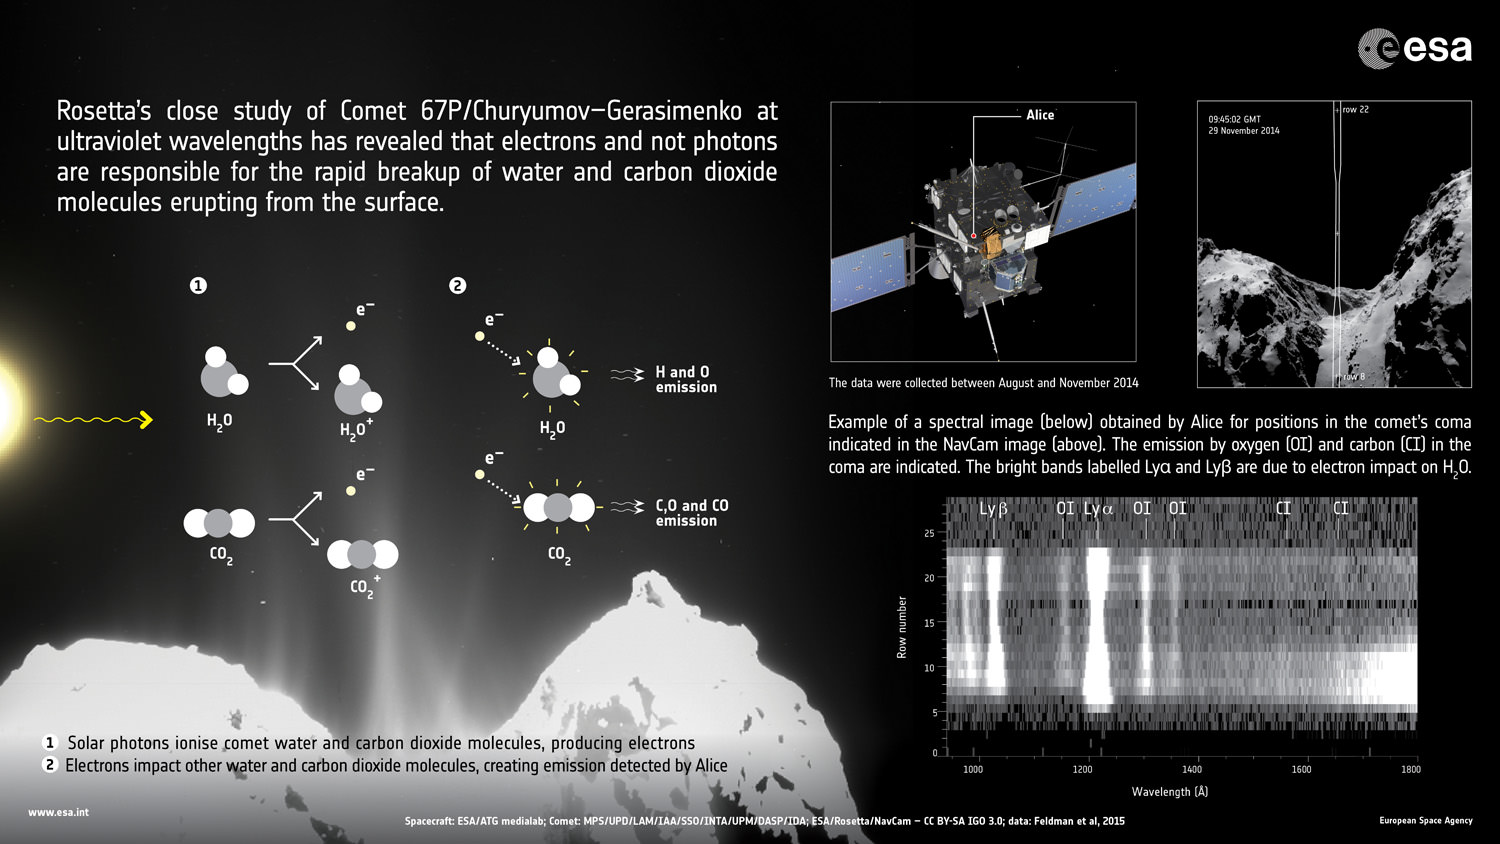 Rosetta’s continued close study of Comet 67P/Churyumov-Gerasimenko has revealed an unexpected process at work close to the comet nucleus that causes the rapid breakup of water and carbon dioxide molecules.   Credits: ESA/ATG medialab; ESA/Rosetta/MPS for OSIRIS Team MPS/UPD/LAM/IAA/SSO/INTA/UPM/DASP/IDA; ESA/Rosetta/NavCam – CC BY-SA IGO 3.0